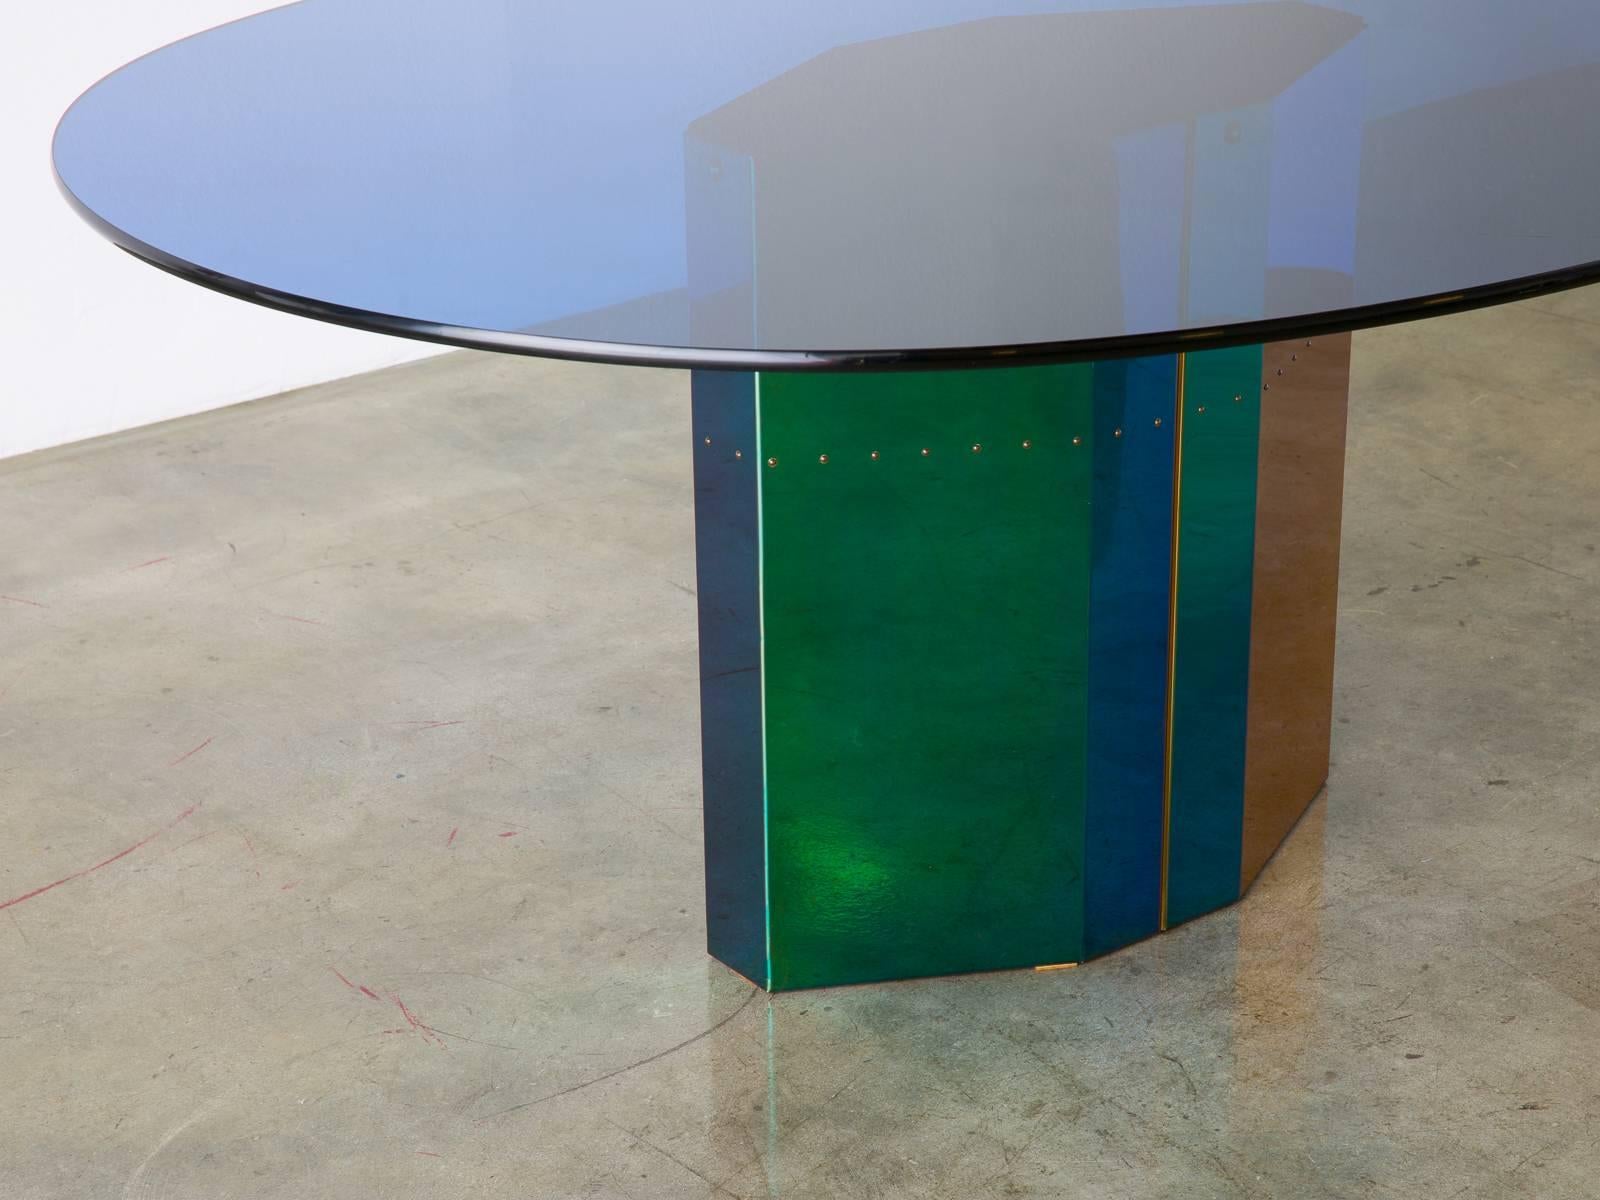 The 'Polygonon' table by Afra & Tobia Scarpa for B & B Italia, 1984. This oval table was part of a series of four base designs by the Scarpas that explored press-formed stainless steel electro coated with an iridescent finish. The glass top with